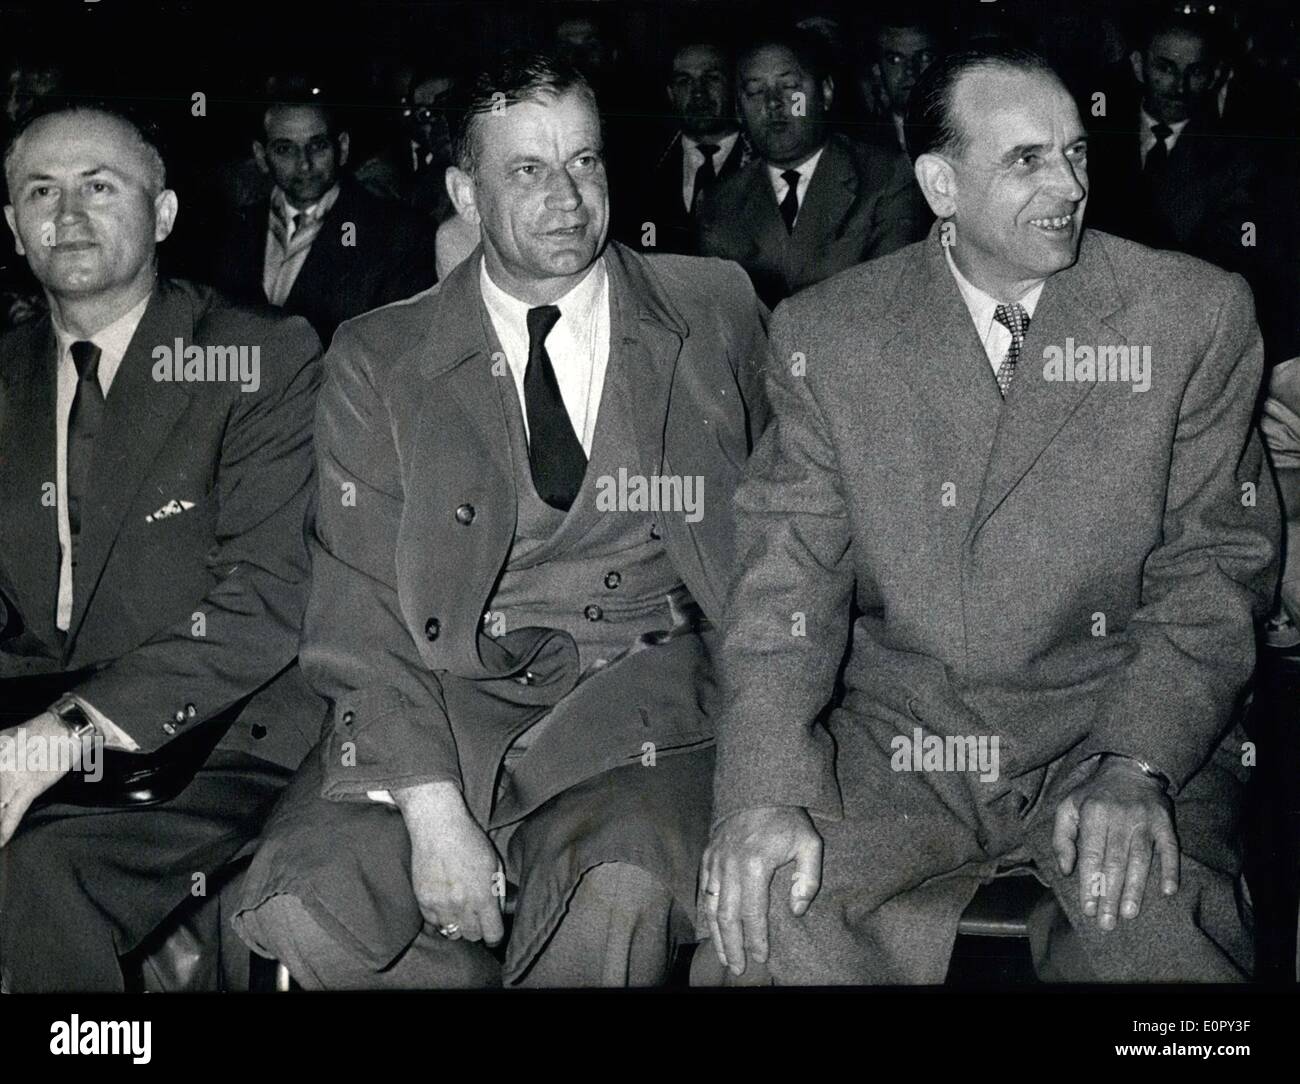 May 05, 1957 - The only witness in the Roehm Trial: who stated on May 15, 1957 in front o the jury in Munich that he had known Lippert from Regensburg, where they had both bee members of the Country-police, was Alfons Kaindl 47 years old (right)., Kaindl stated that Lipper's Statement about the position during the shooting of Roehm were false. He had stood in a different spot. Photo shows left to right: - the witness Gustav Seibold (Gustav Seibold) Otto Hofbauer (OTTO HOFBAUER) (43) and Alfons Kaindl (47) Stock Photo